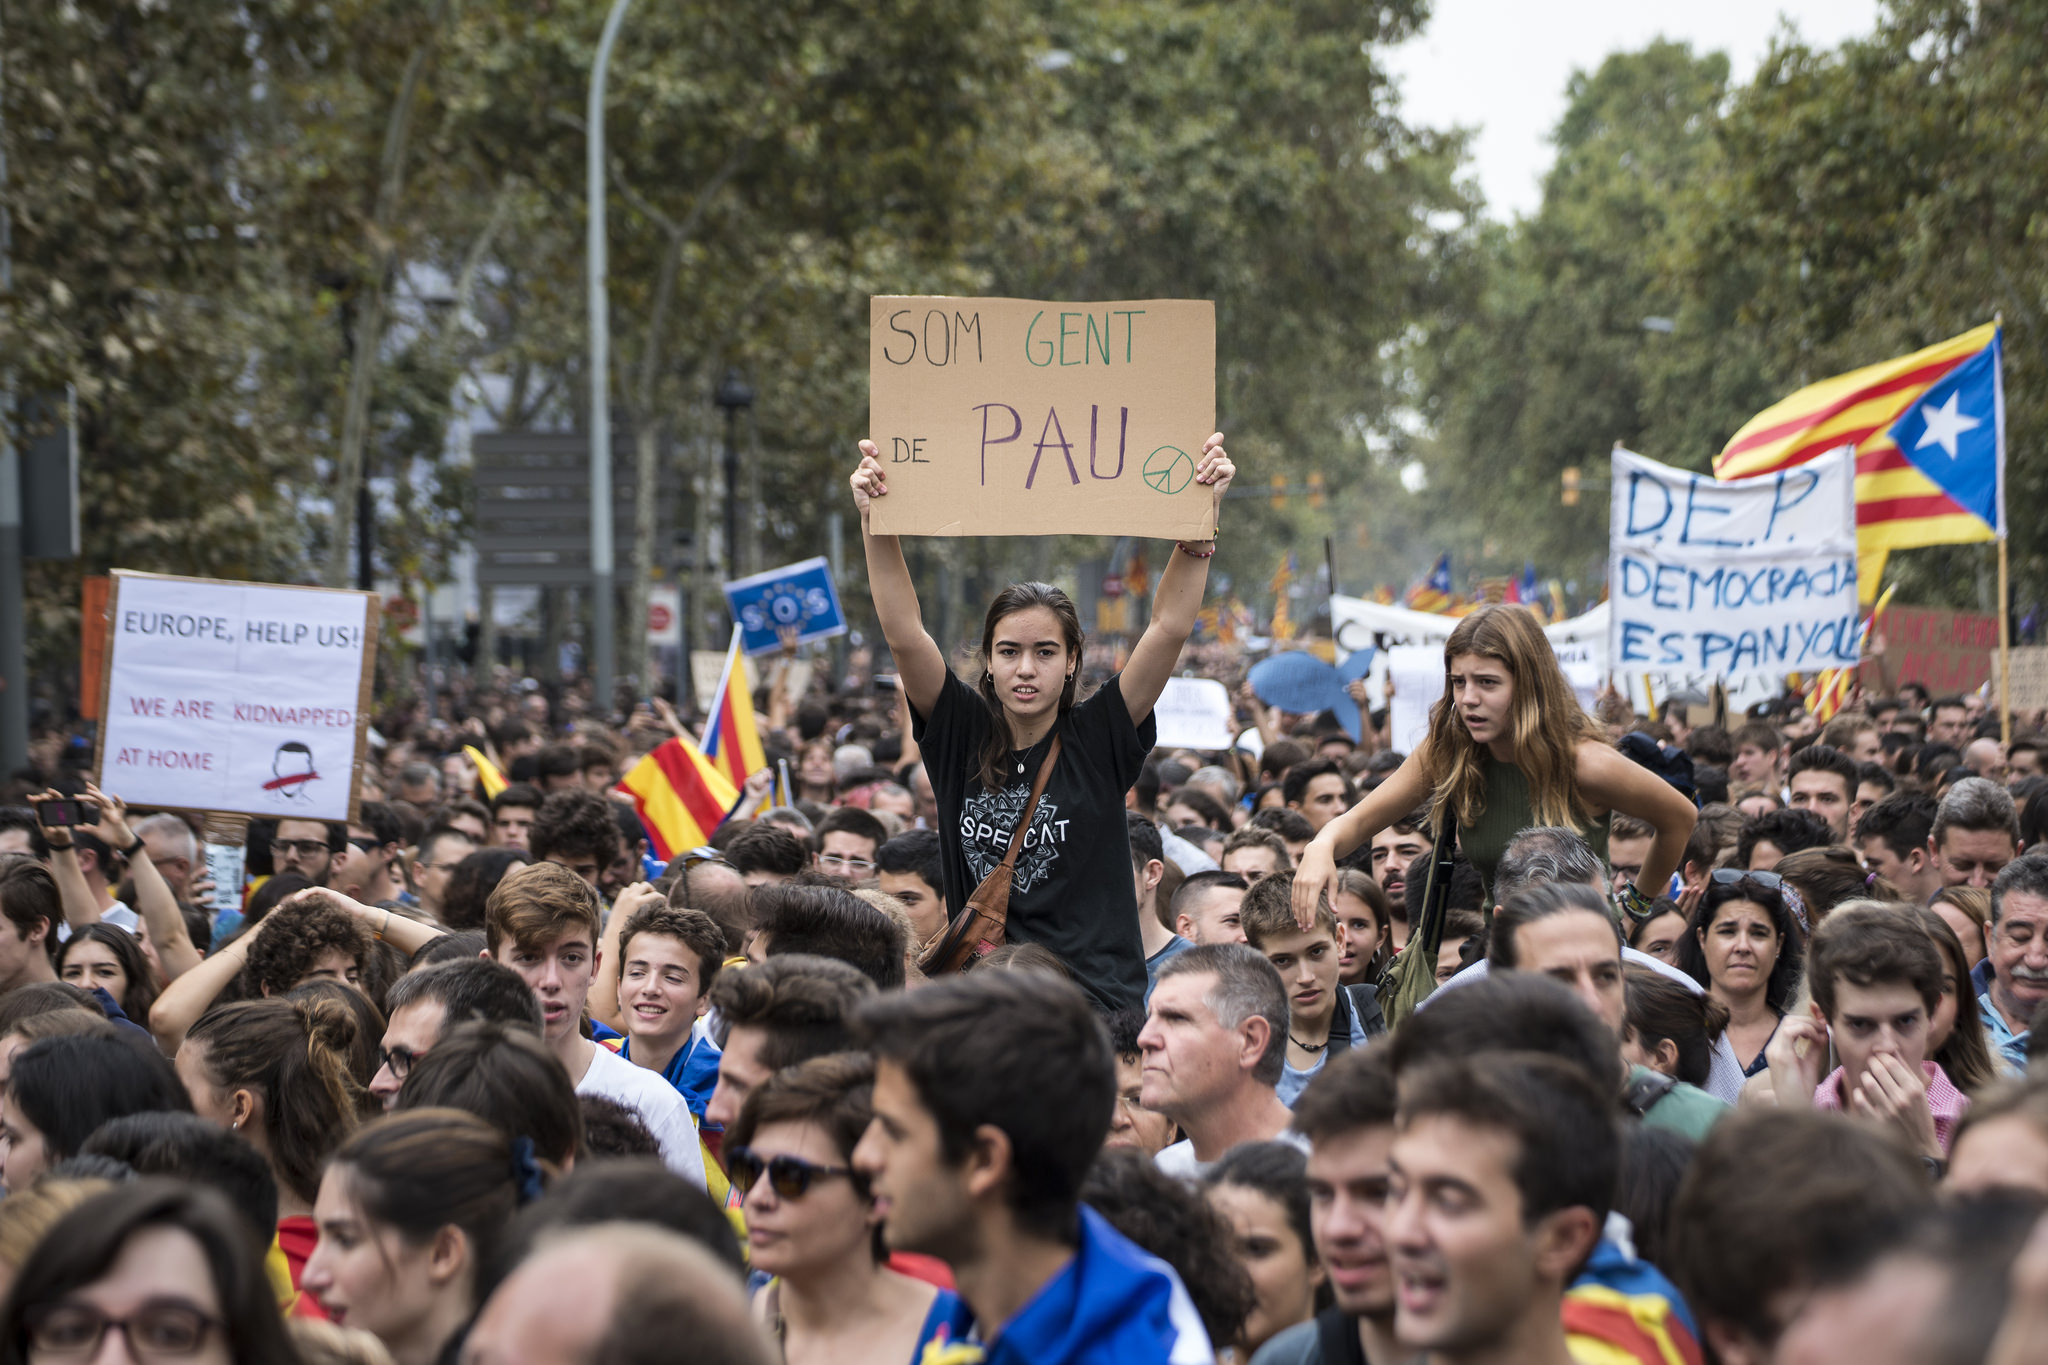 Catalan independence movement, Catalan referendum, Madrid crackdown, paramilitary police, Spanish protests, Catalan protests